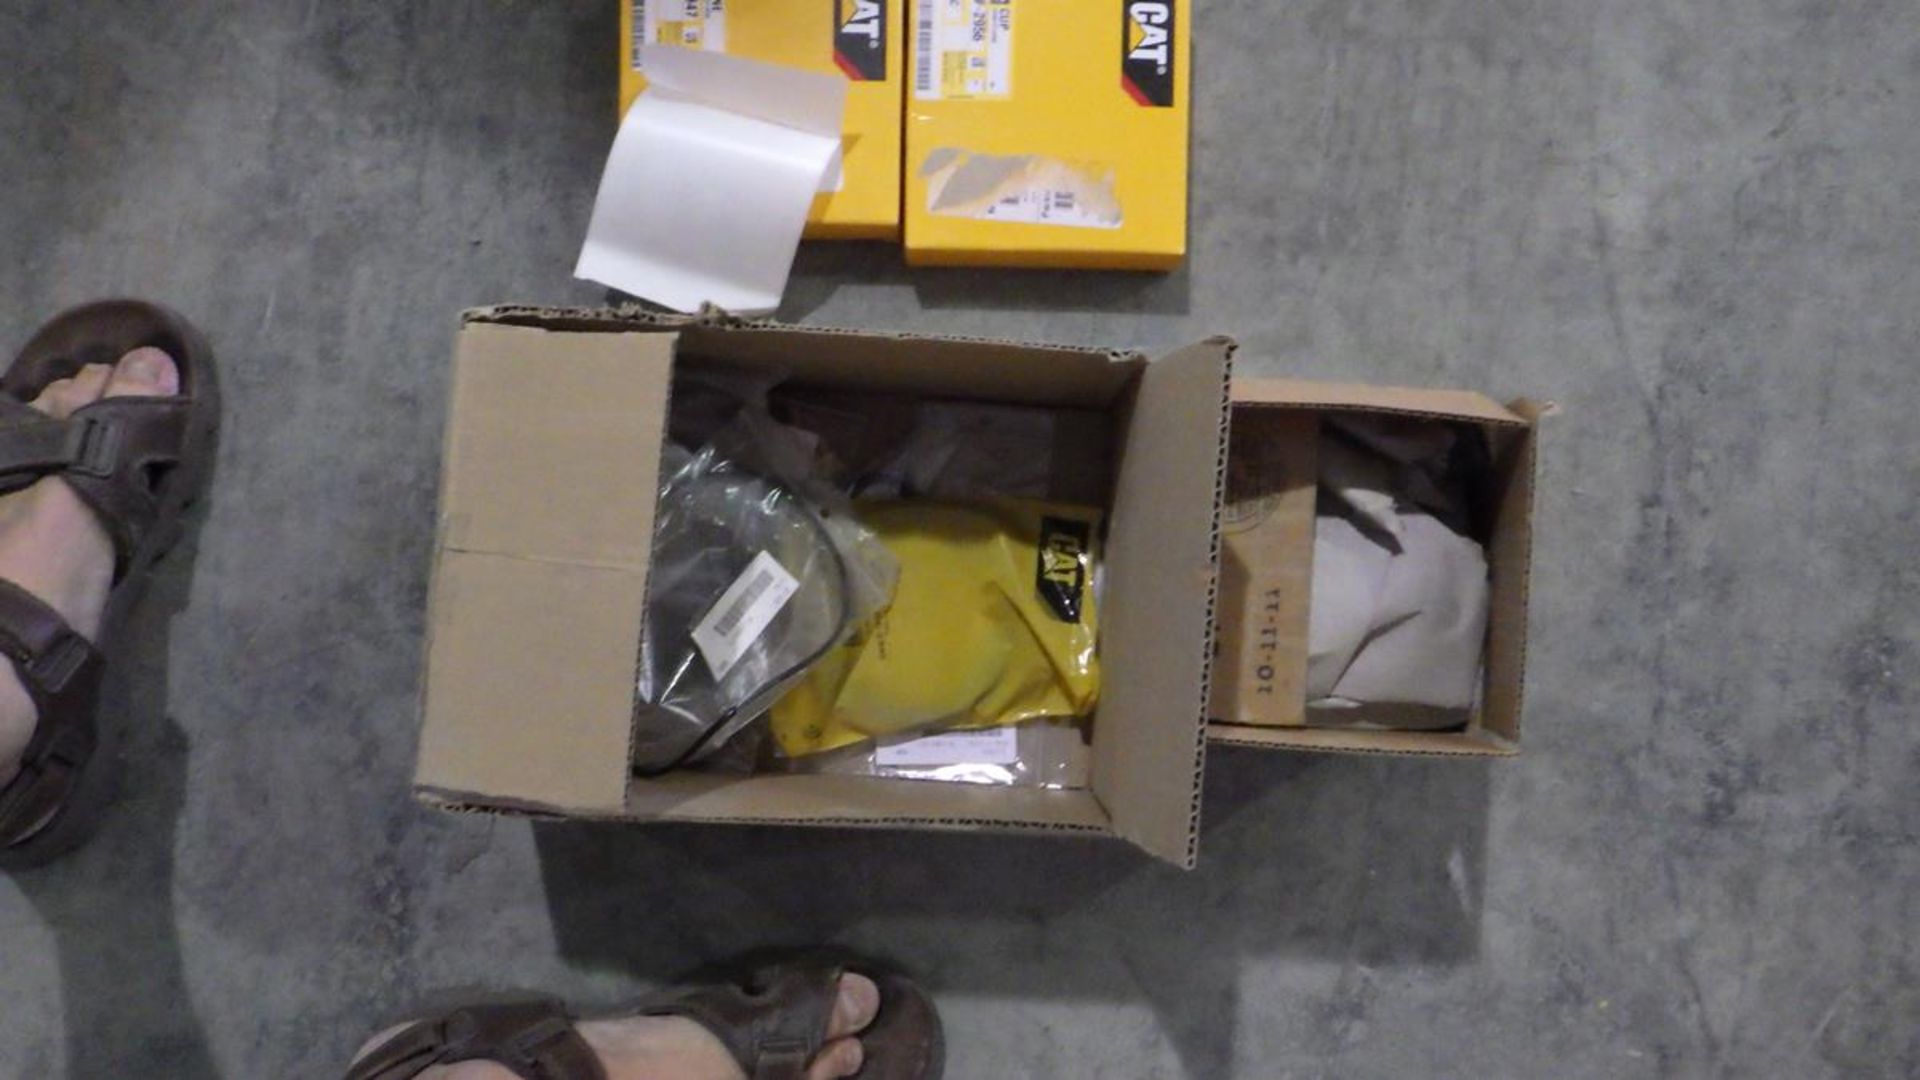 LOT OF UNUSED CATERPILLAR PARTS INCLUDING BEARING AND SEALS - Image 2 of 3